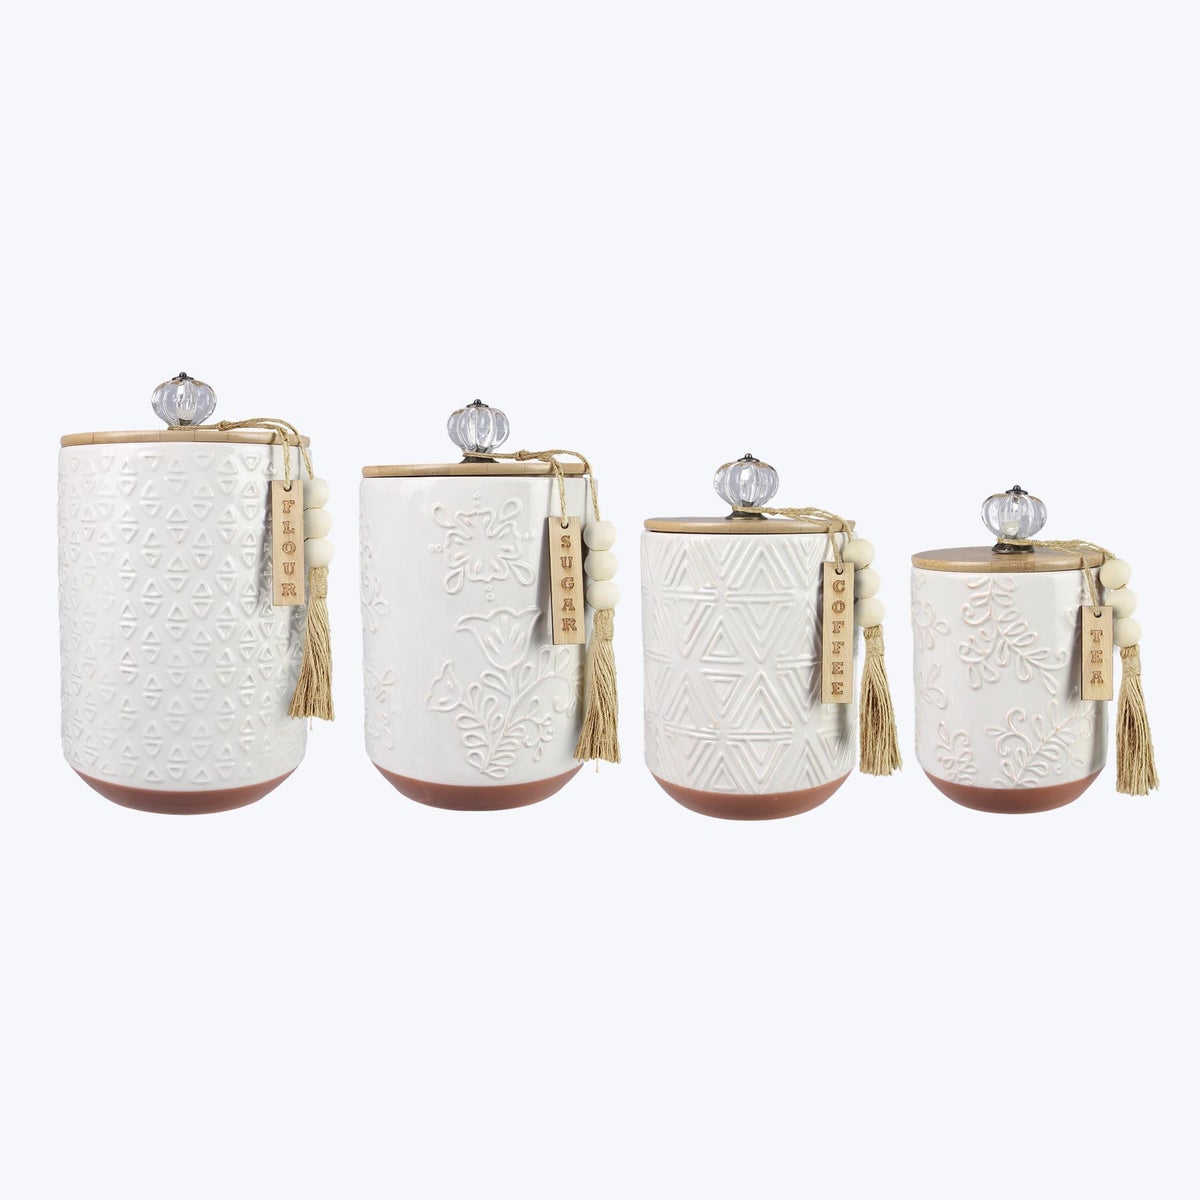 Ceramic Canister with Wood Lid/Silicone Seal. Crystal Knob & Blessing Bead Tassel Accent, 4 pc/set